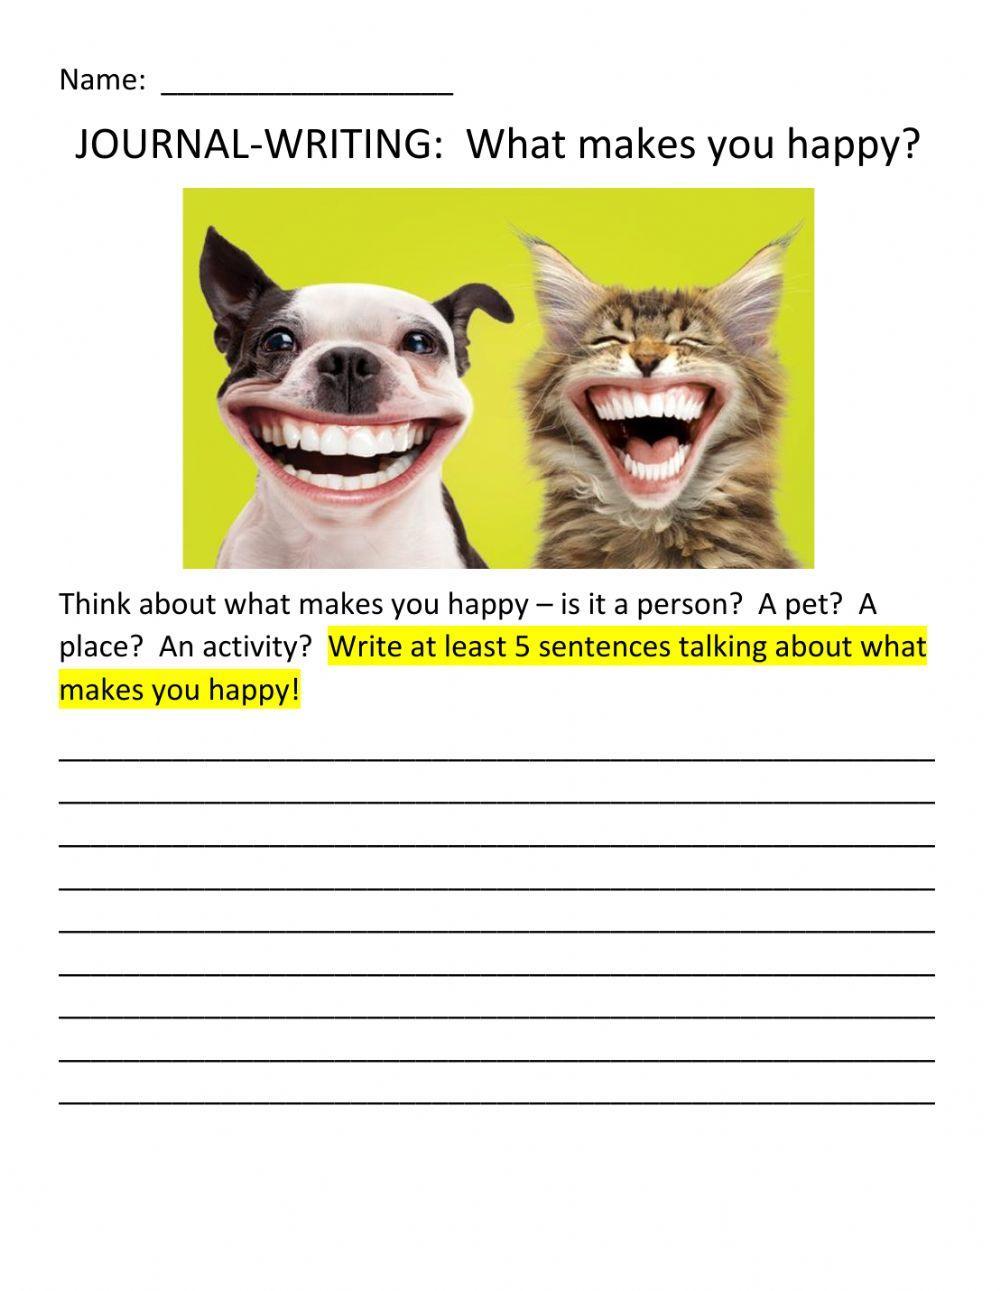 JOURNAL-WRITING:  What Makes You Happy?